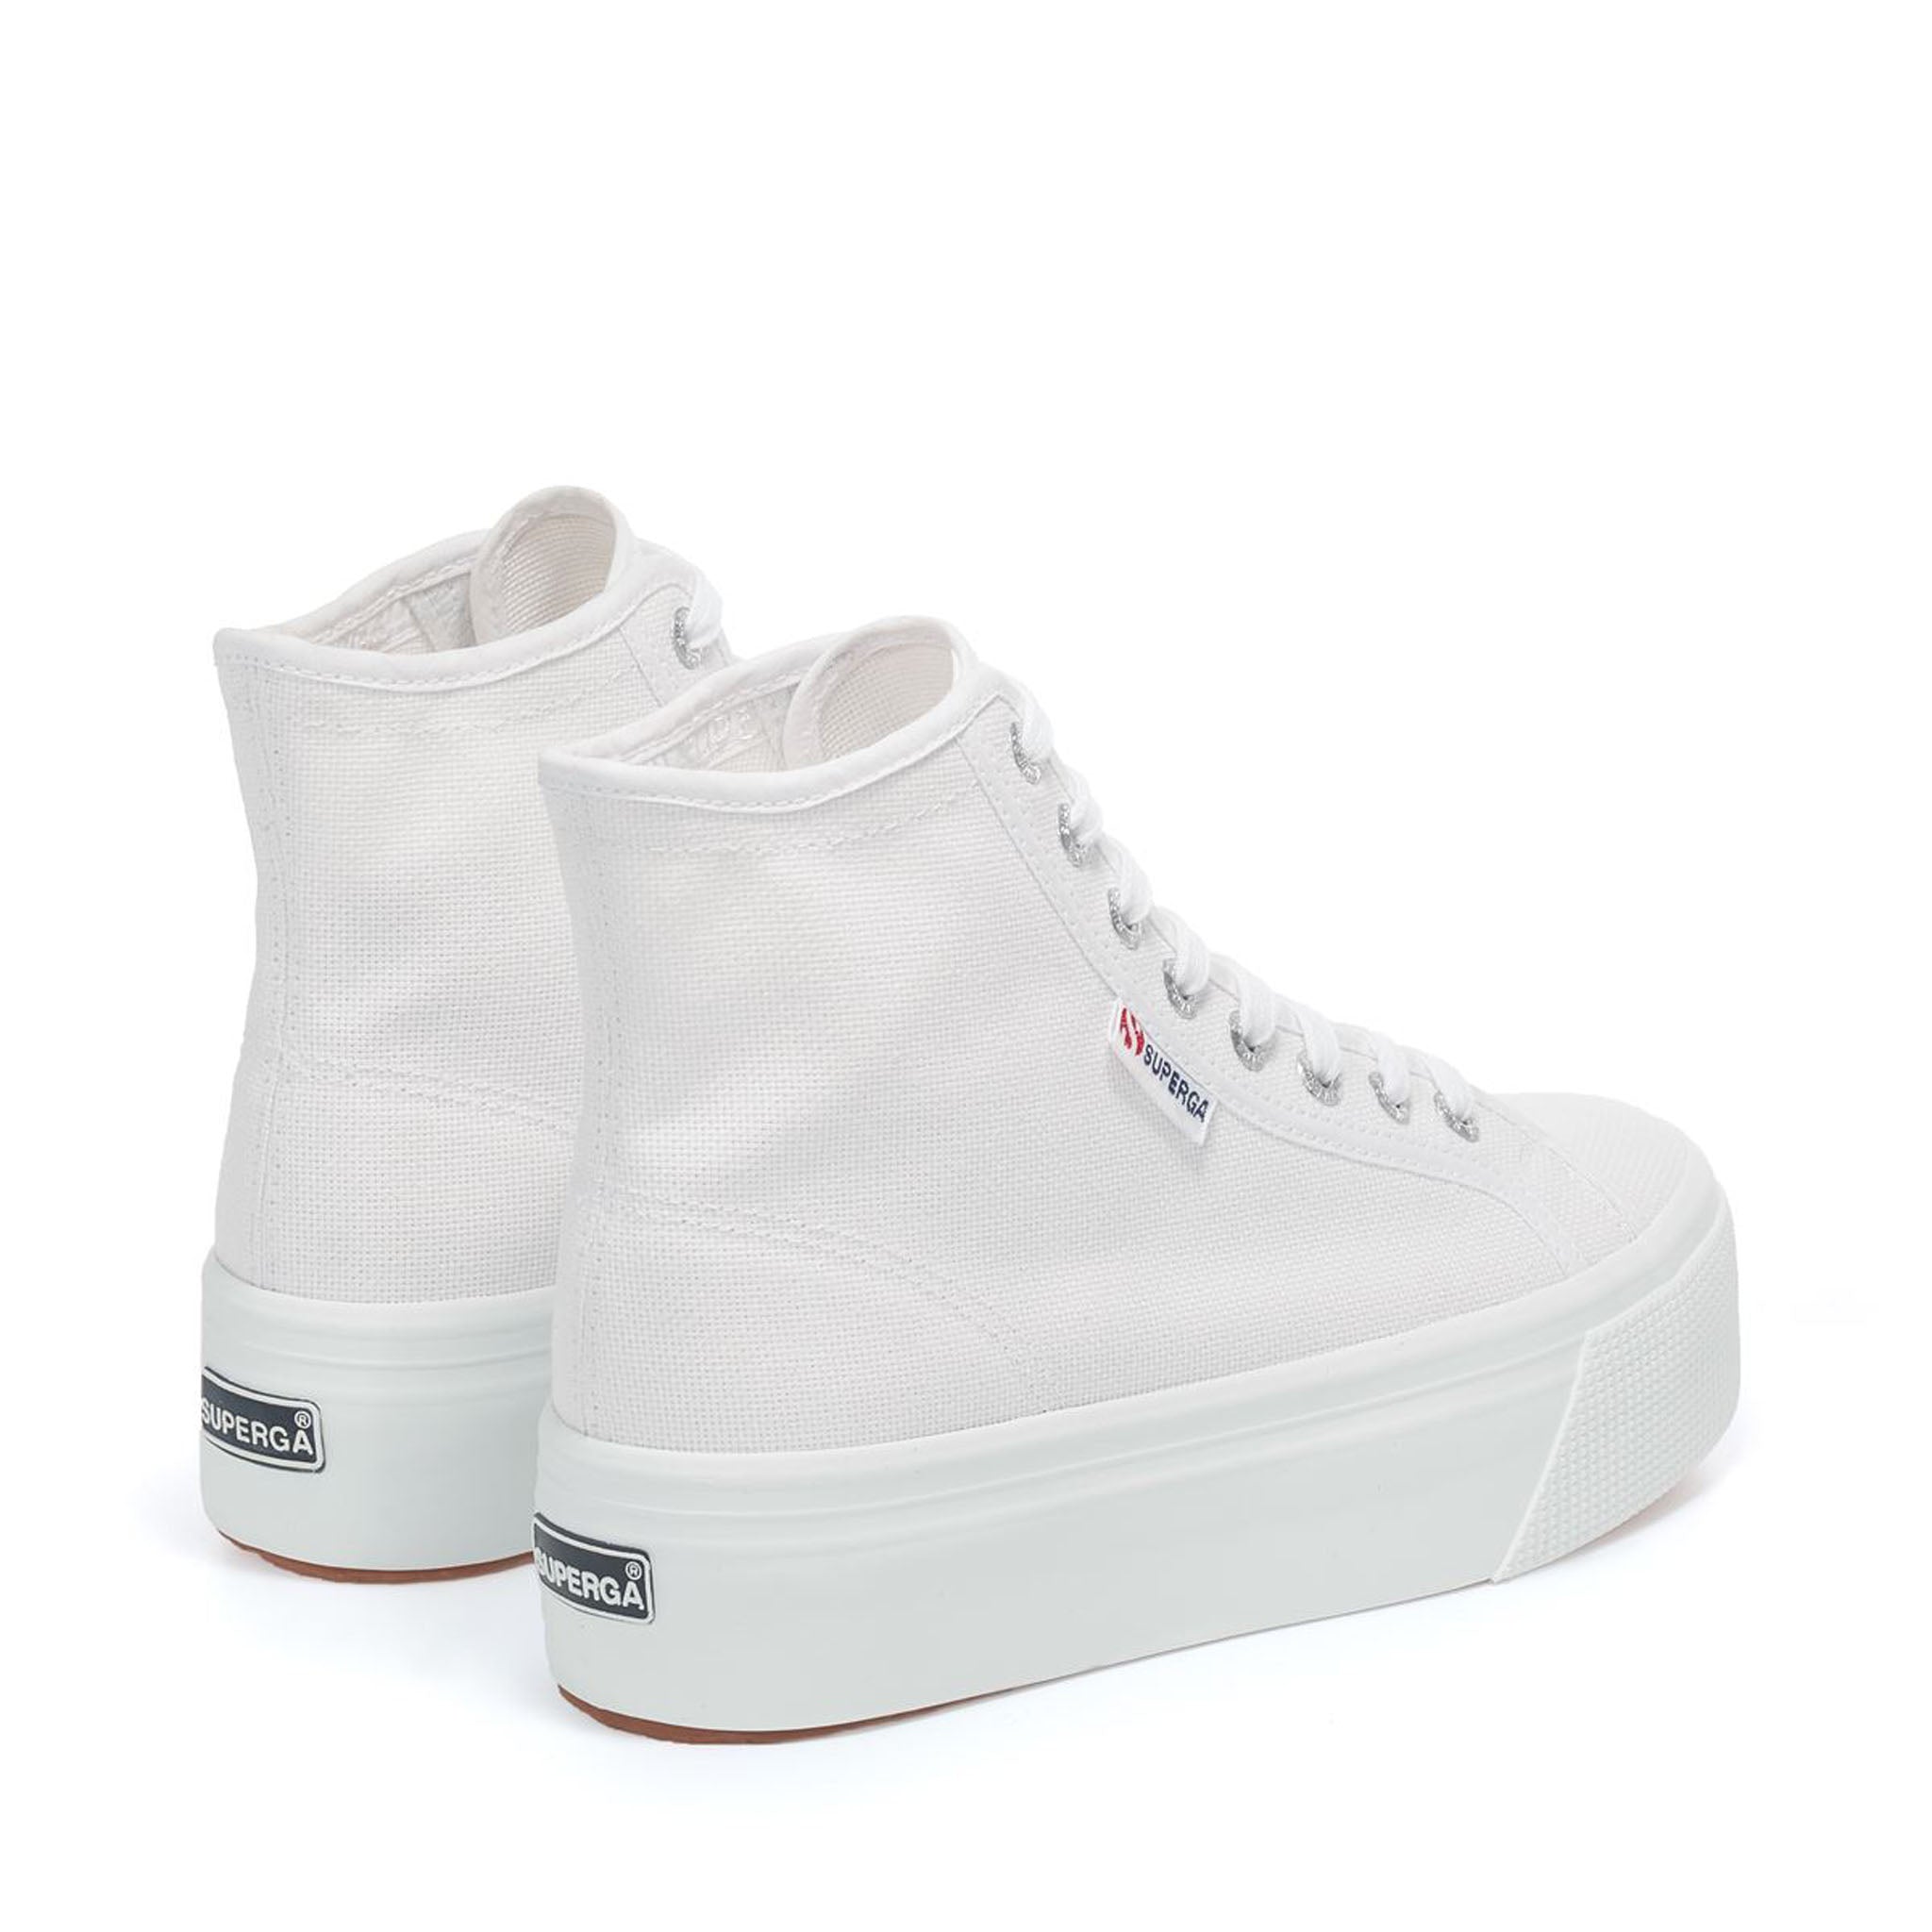 Superga 2708 High Top Sneakers - White. Back view.